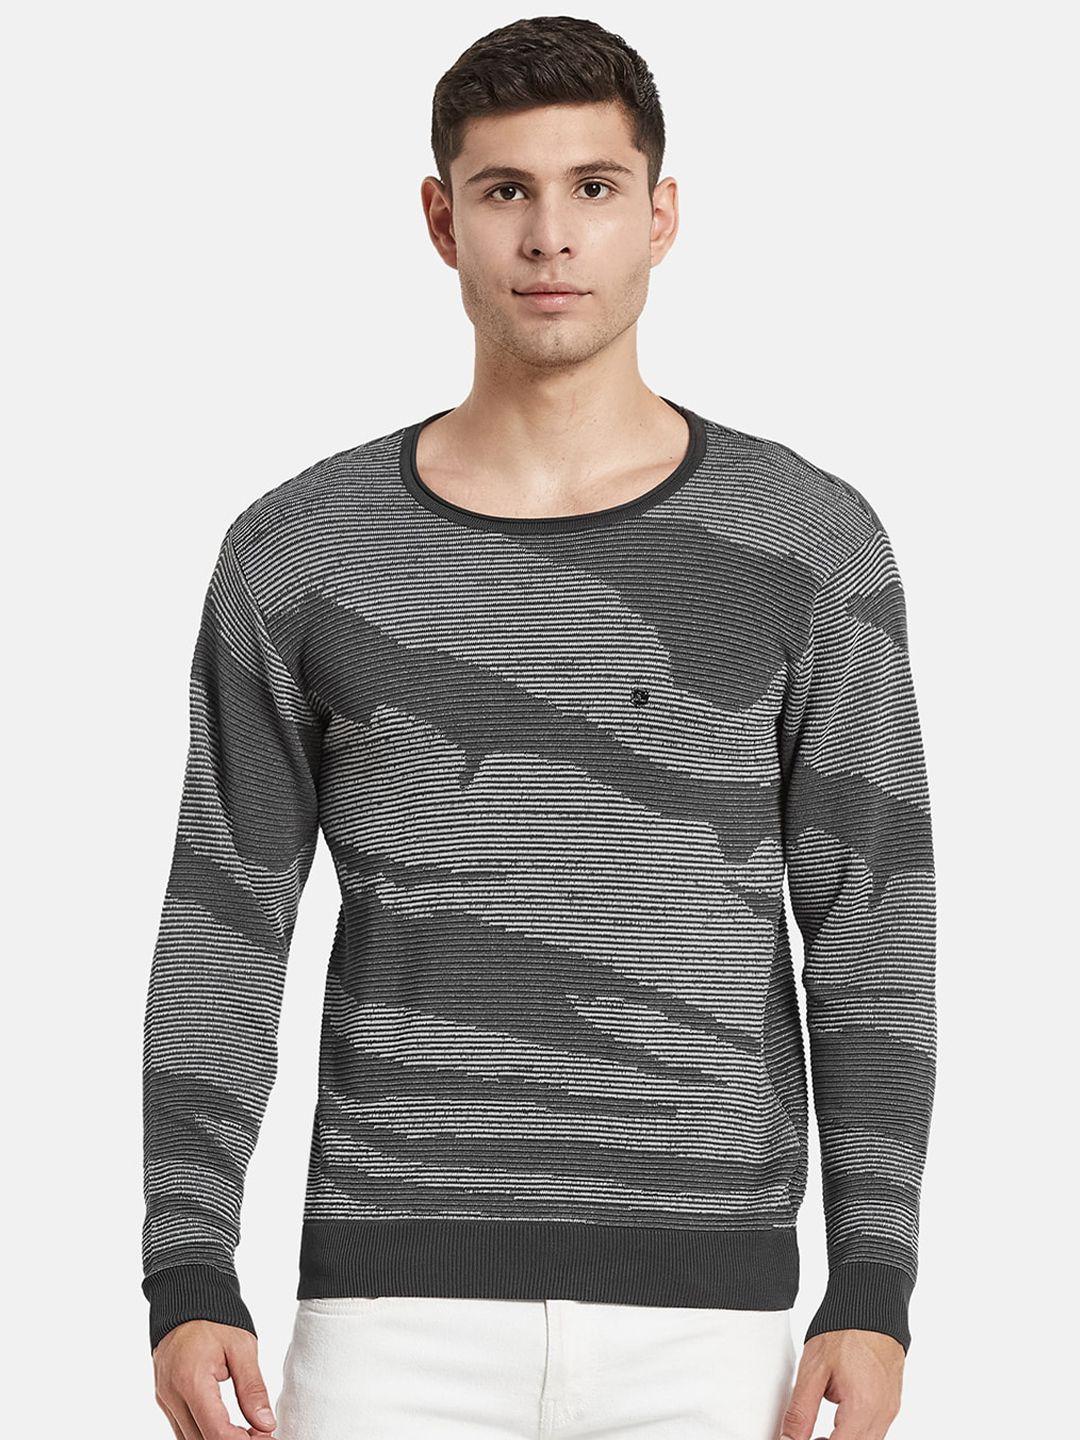 monte carlo men grey abstract print long sleeves cotton pullover sweater